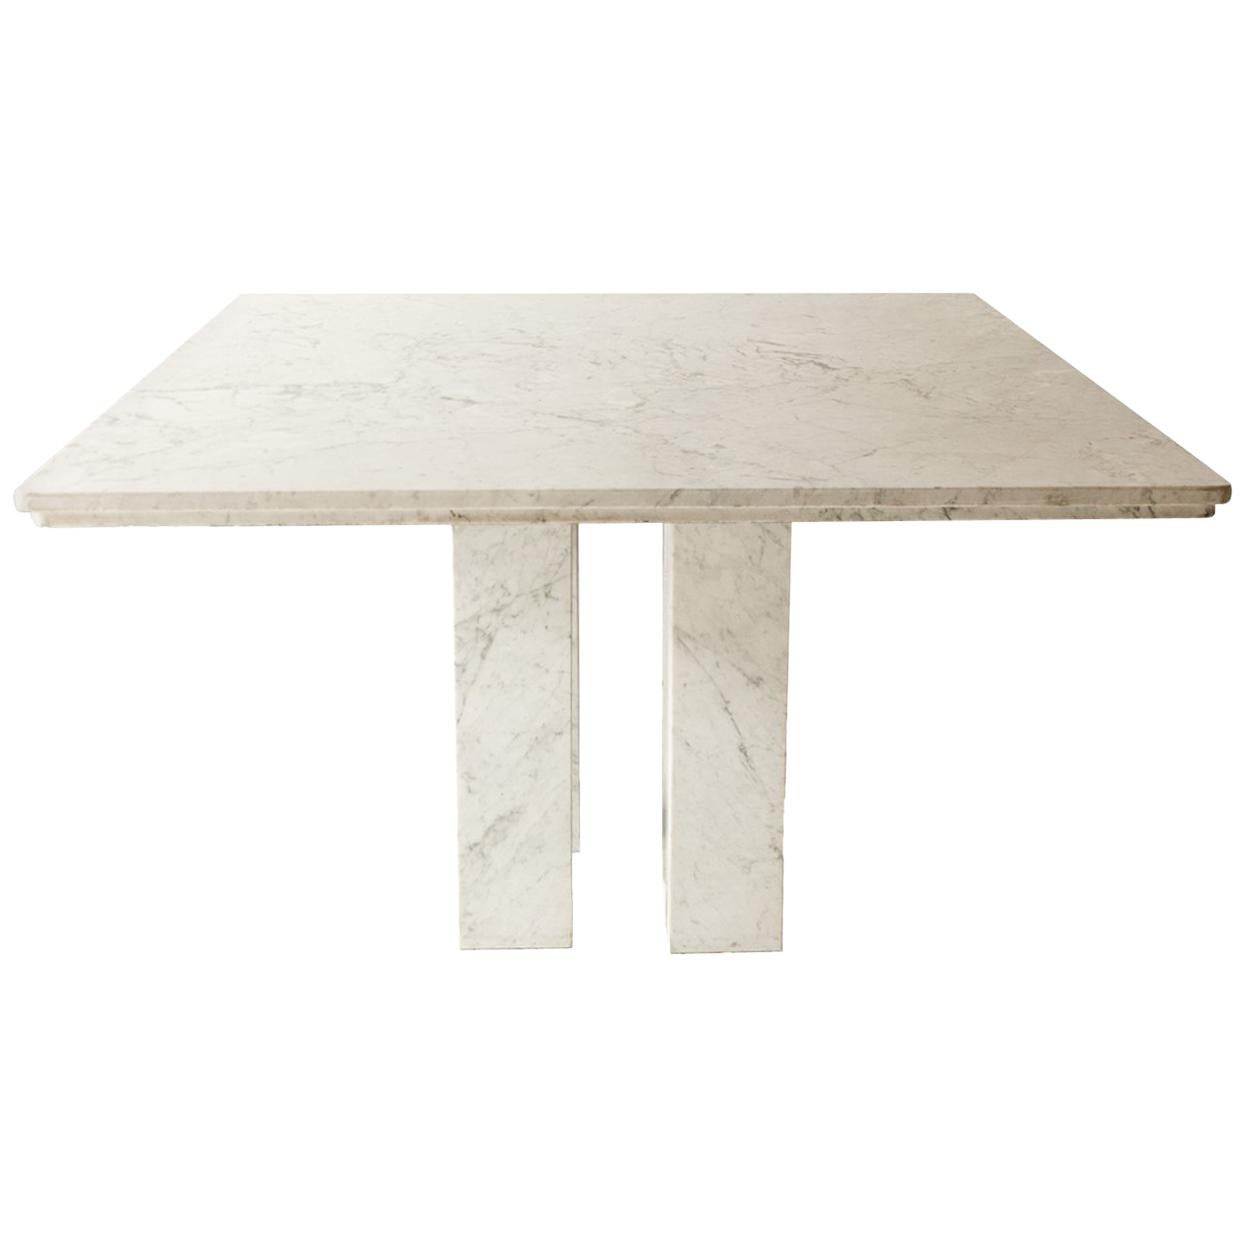 Square Italian Dining Table in Carrara Marble with Four Massive Columns